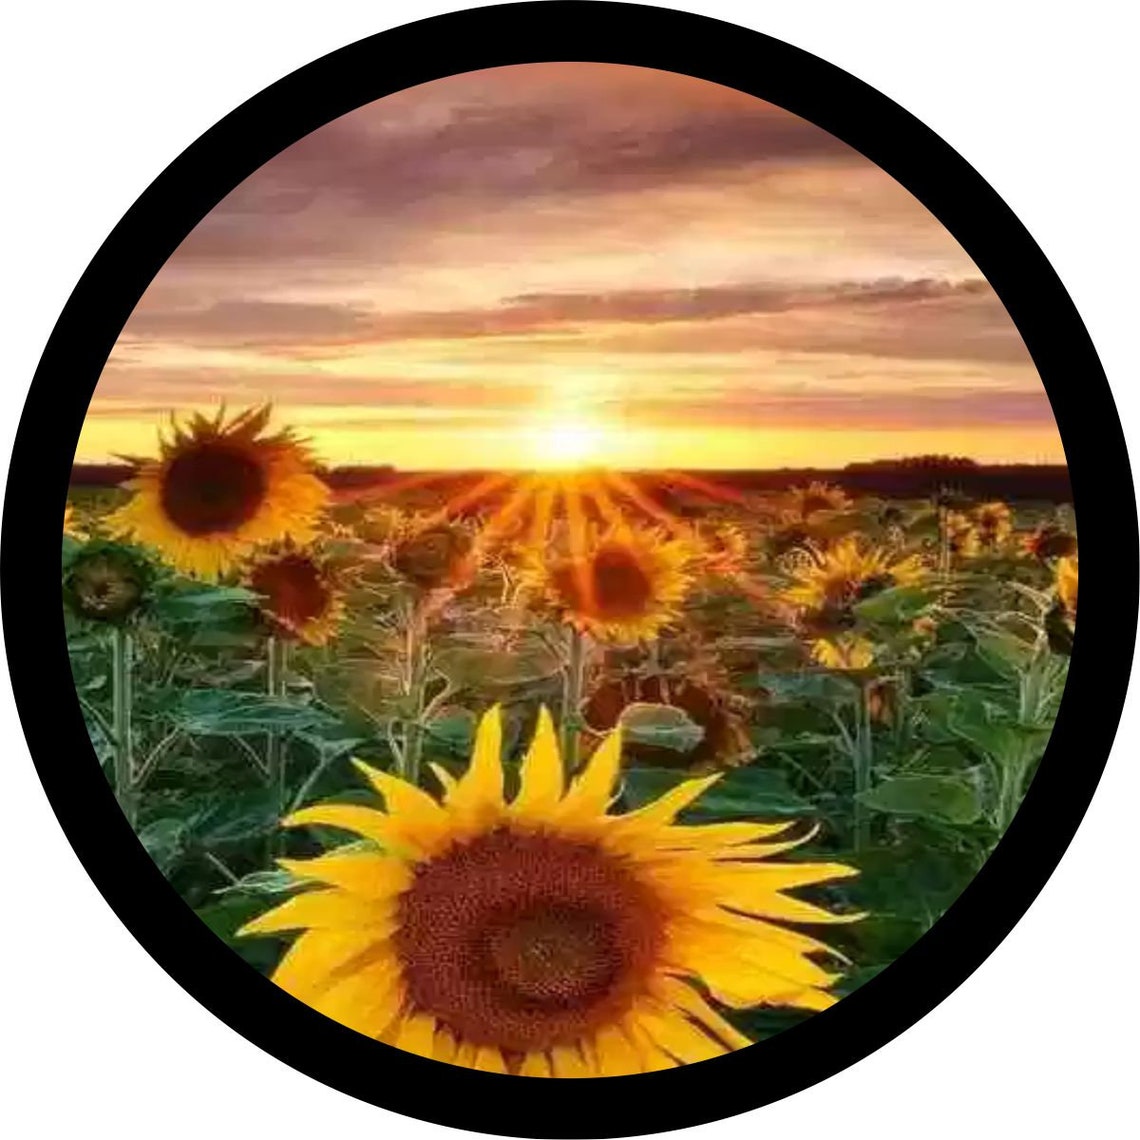 Painted Portrait Print at Sunset - Field of Sunflowers Spare Tire Cover